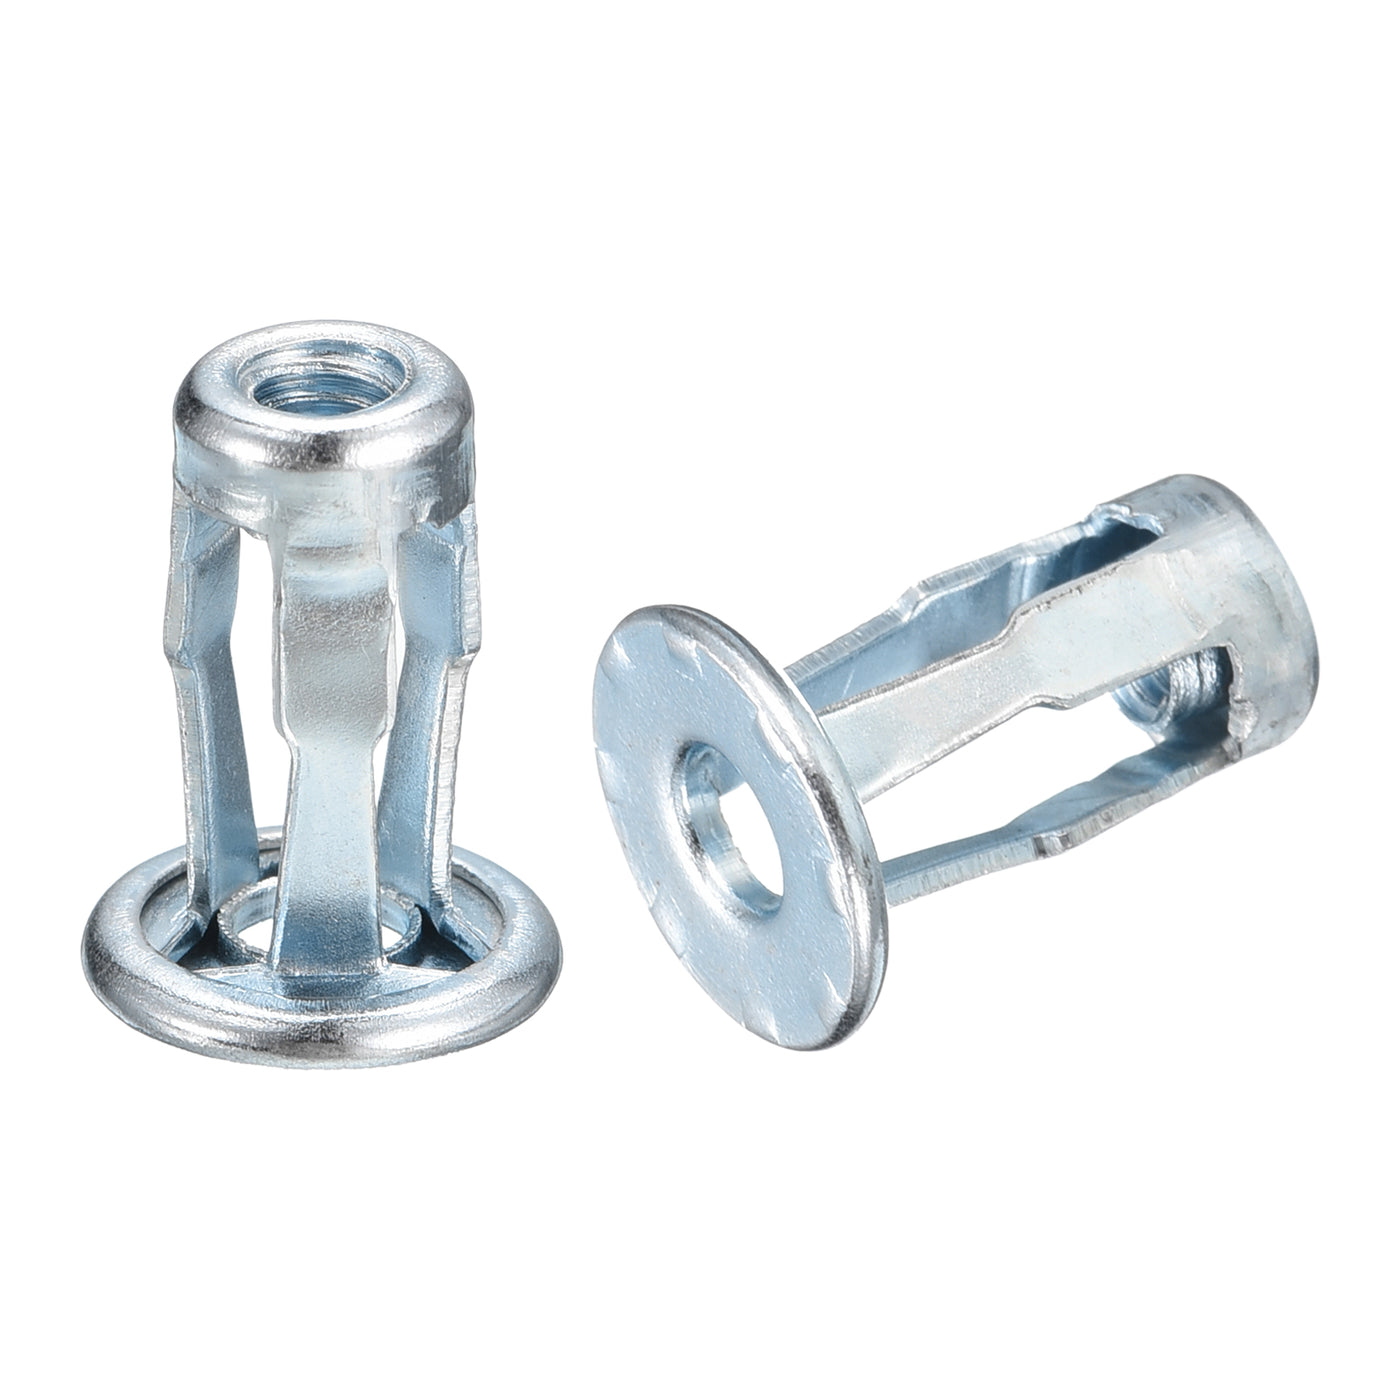 uxcell Uxcell Jack Nuts, Threaded Insert Nut 304 Stainless Steel Rivet Nuts for Thin Metal